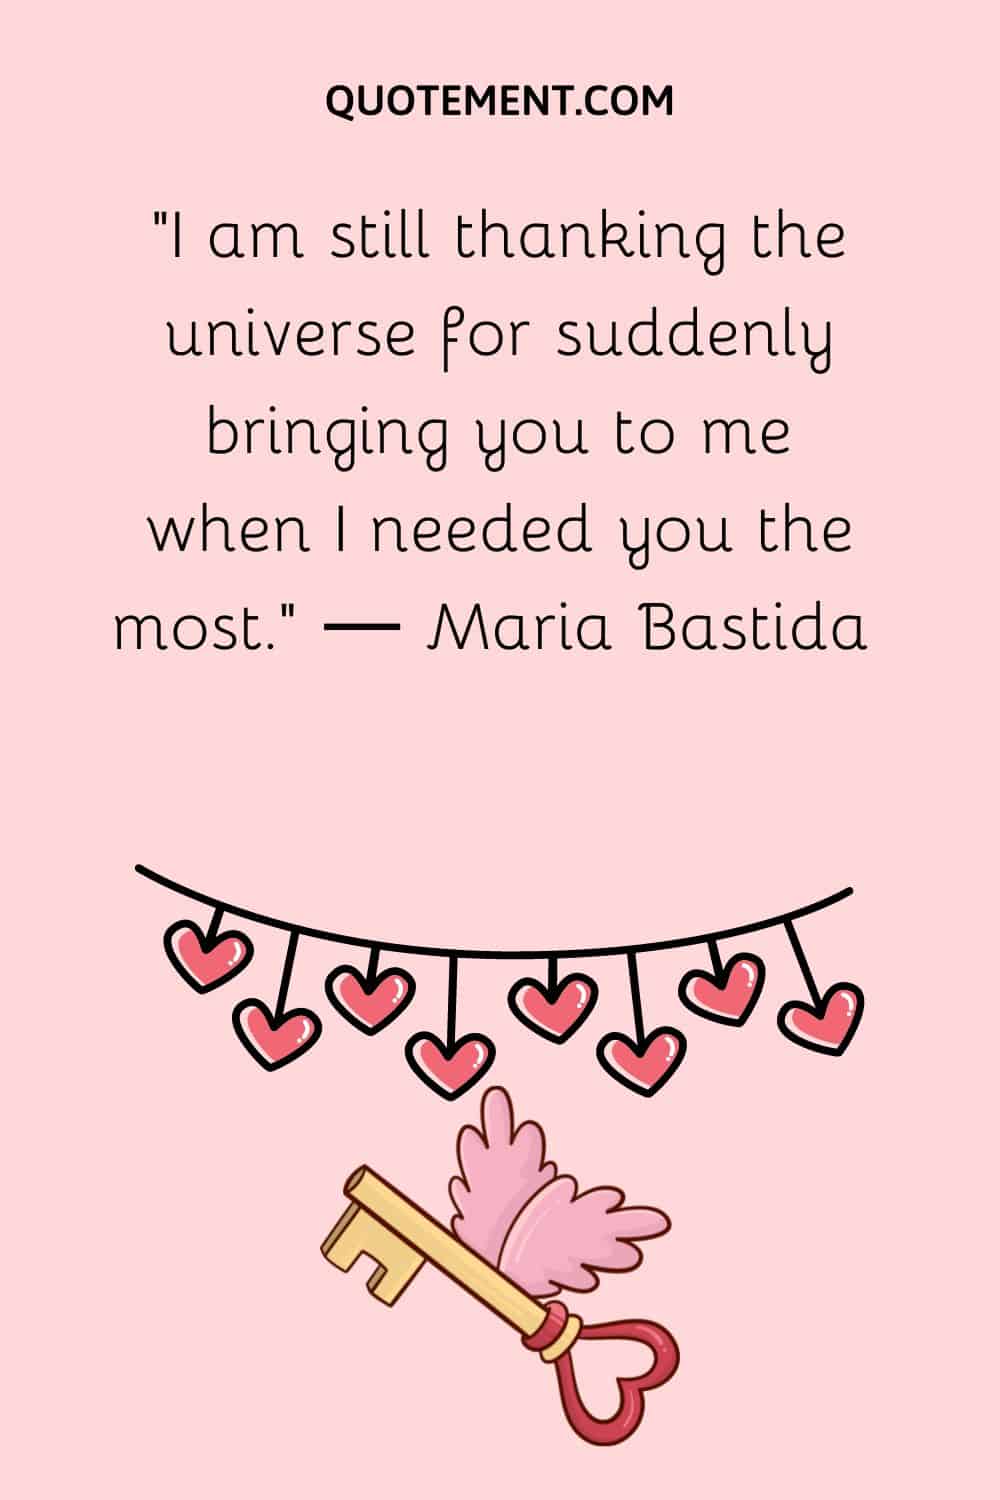 “I am still thanking the universe for suddenly bringing you to me when I needed you the most.” ― Maria Bastida 